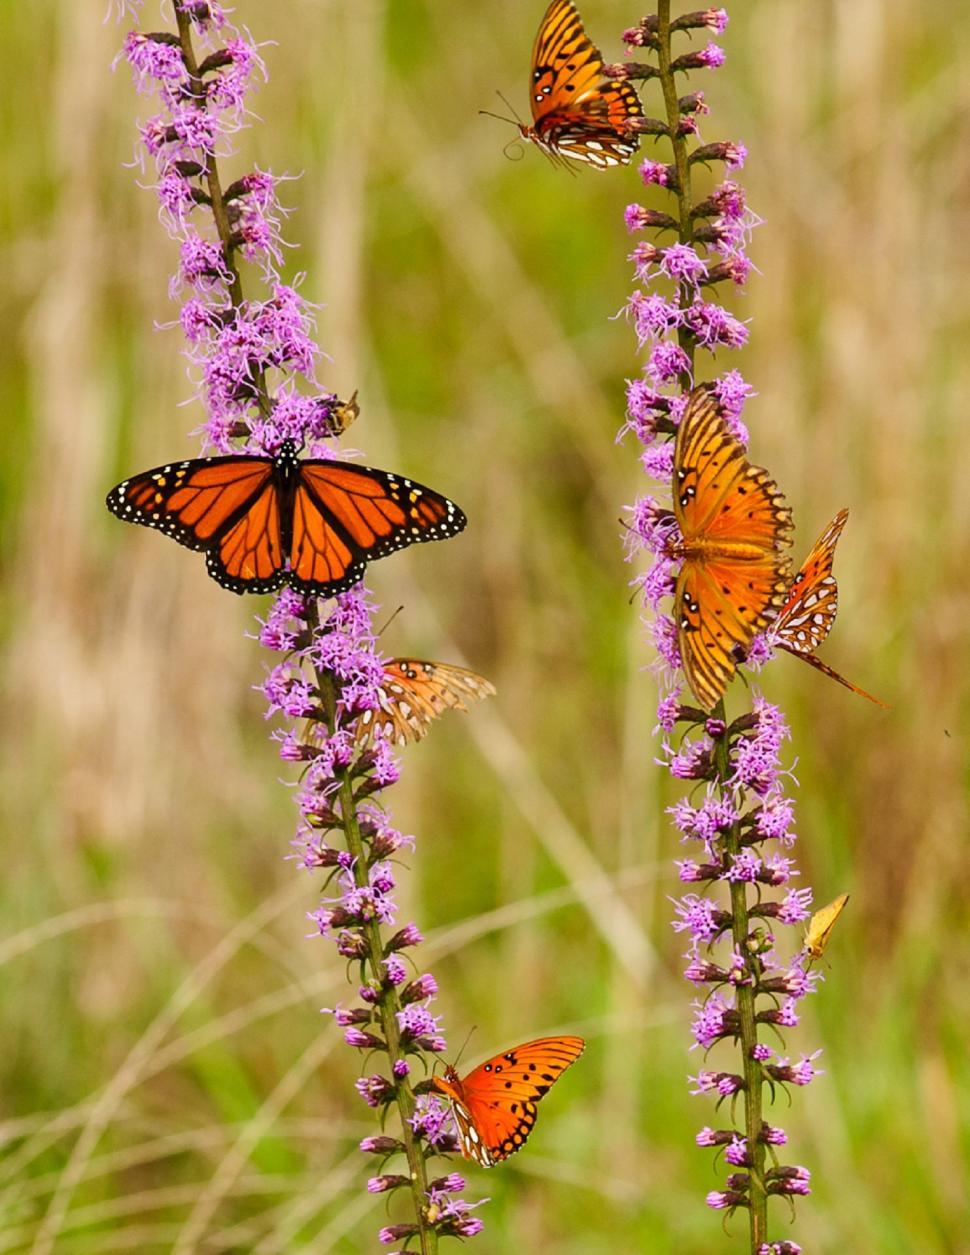 Free Image of Cluster of Butterflies Resting on Flower 